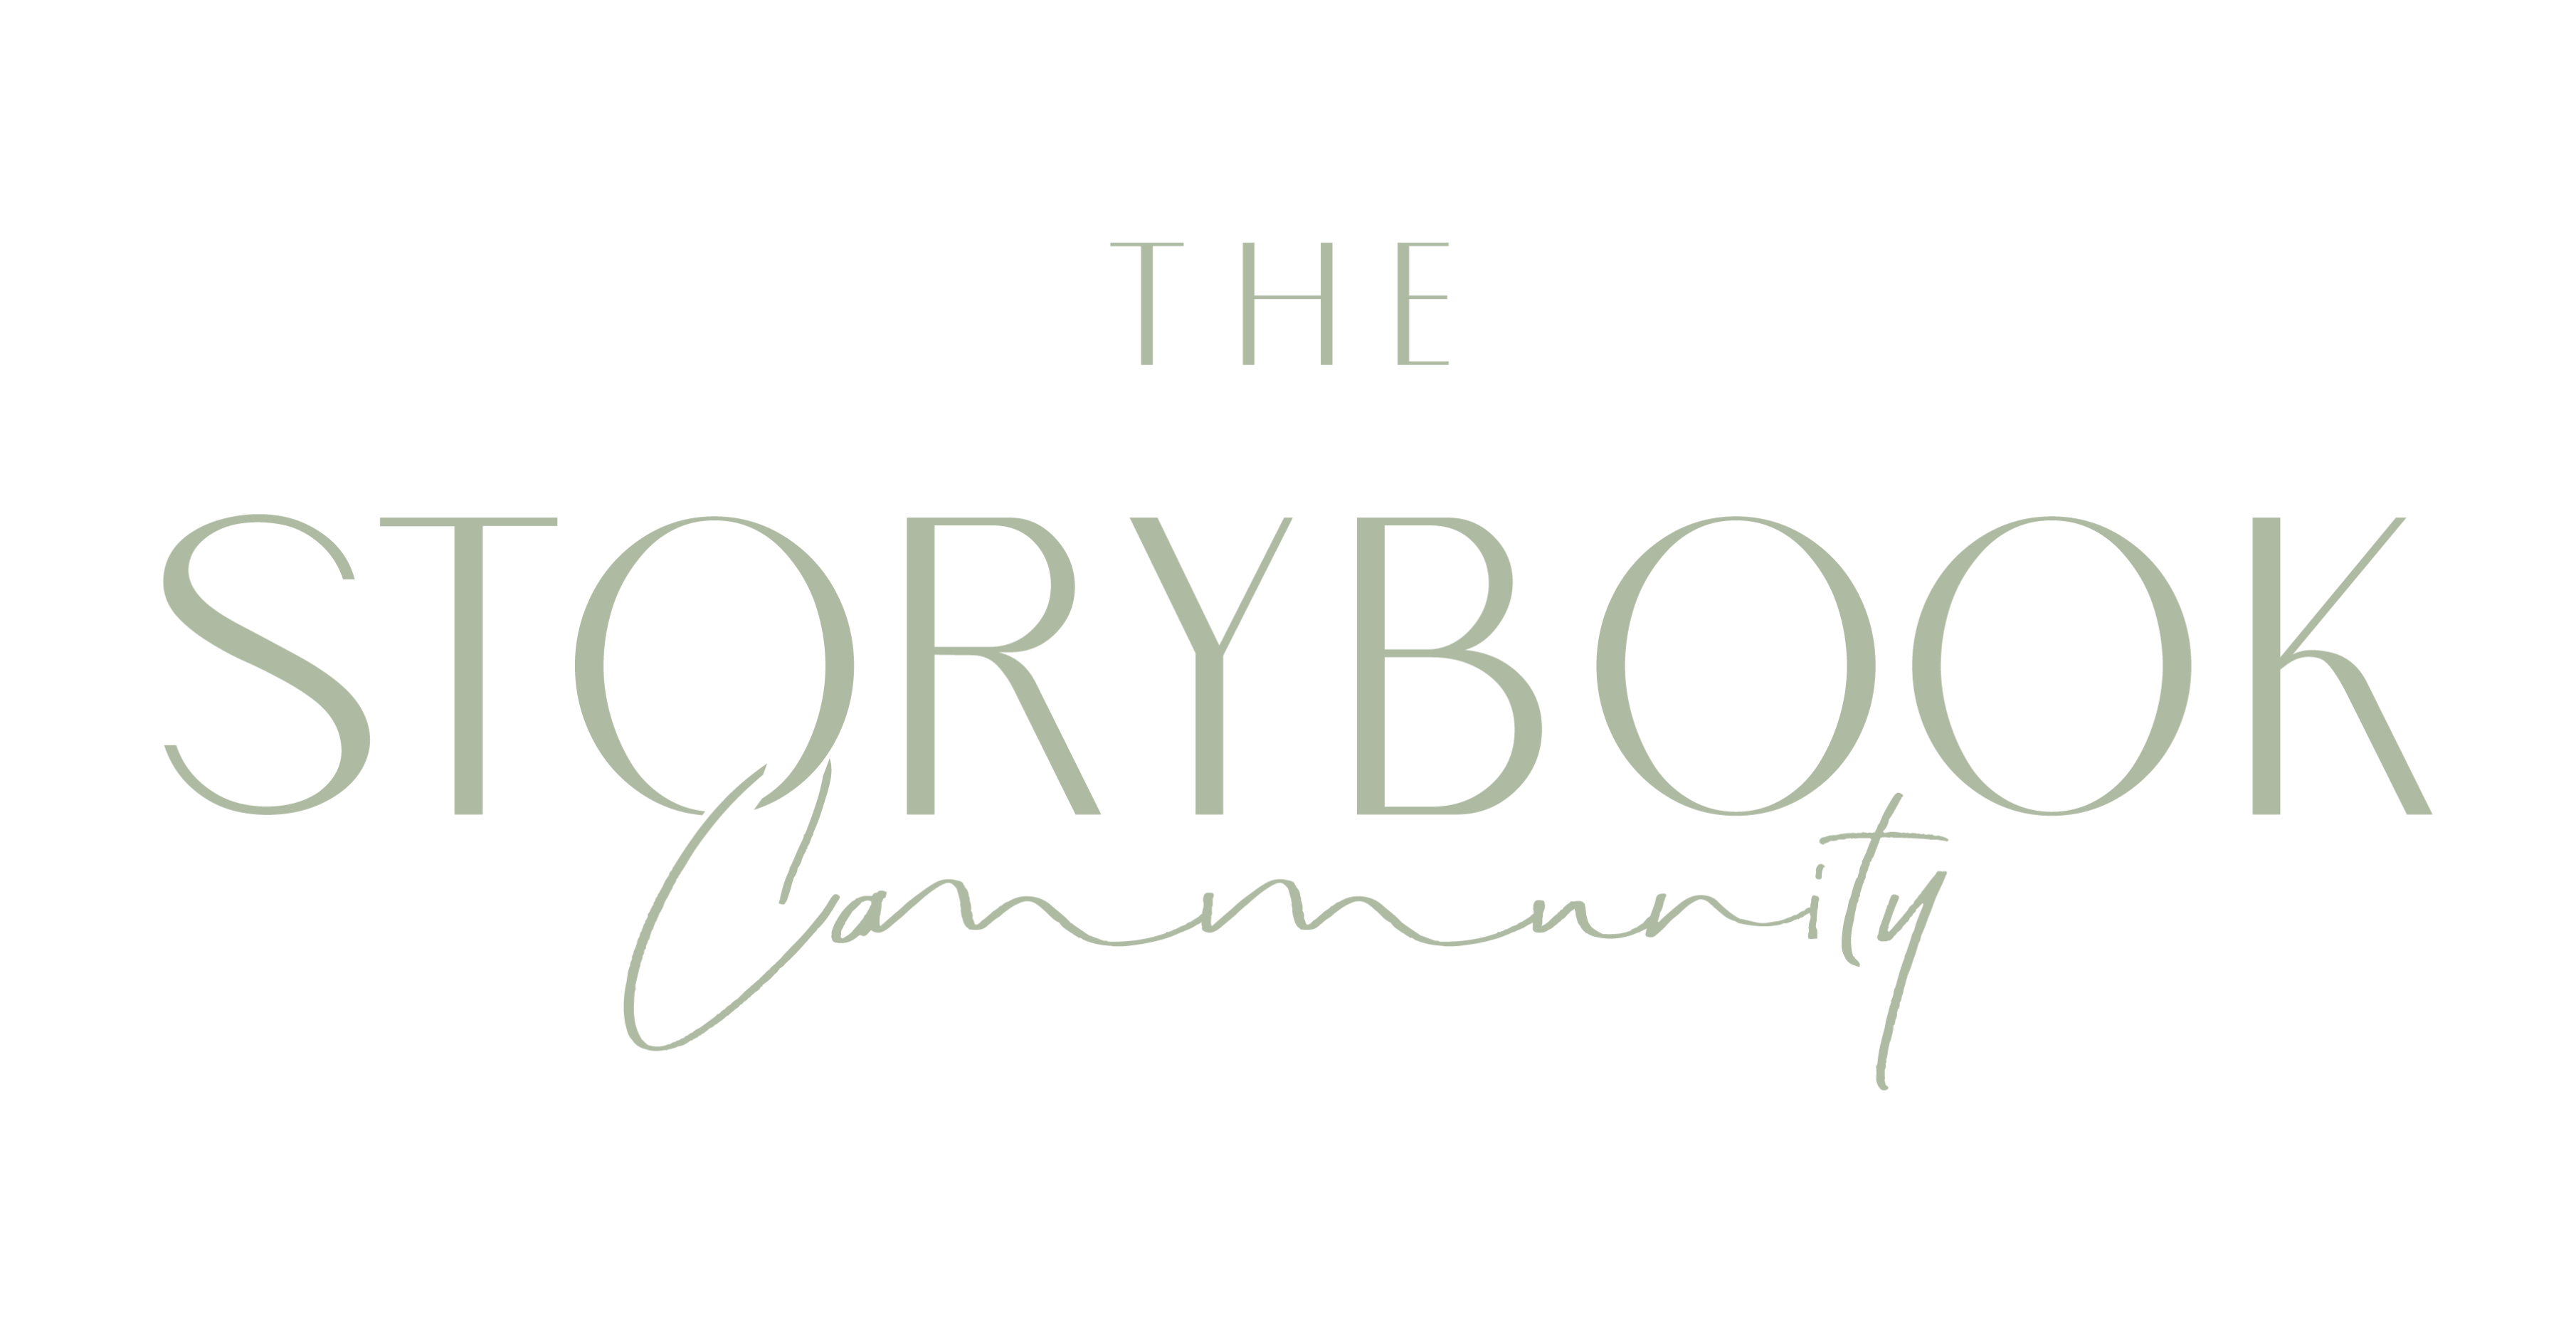 The Storybook Community